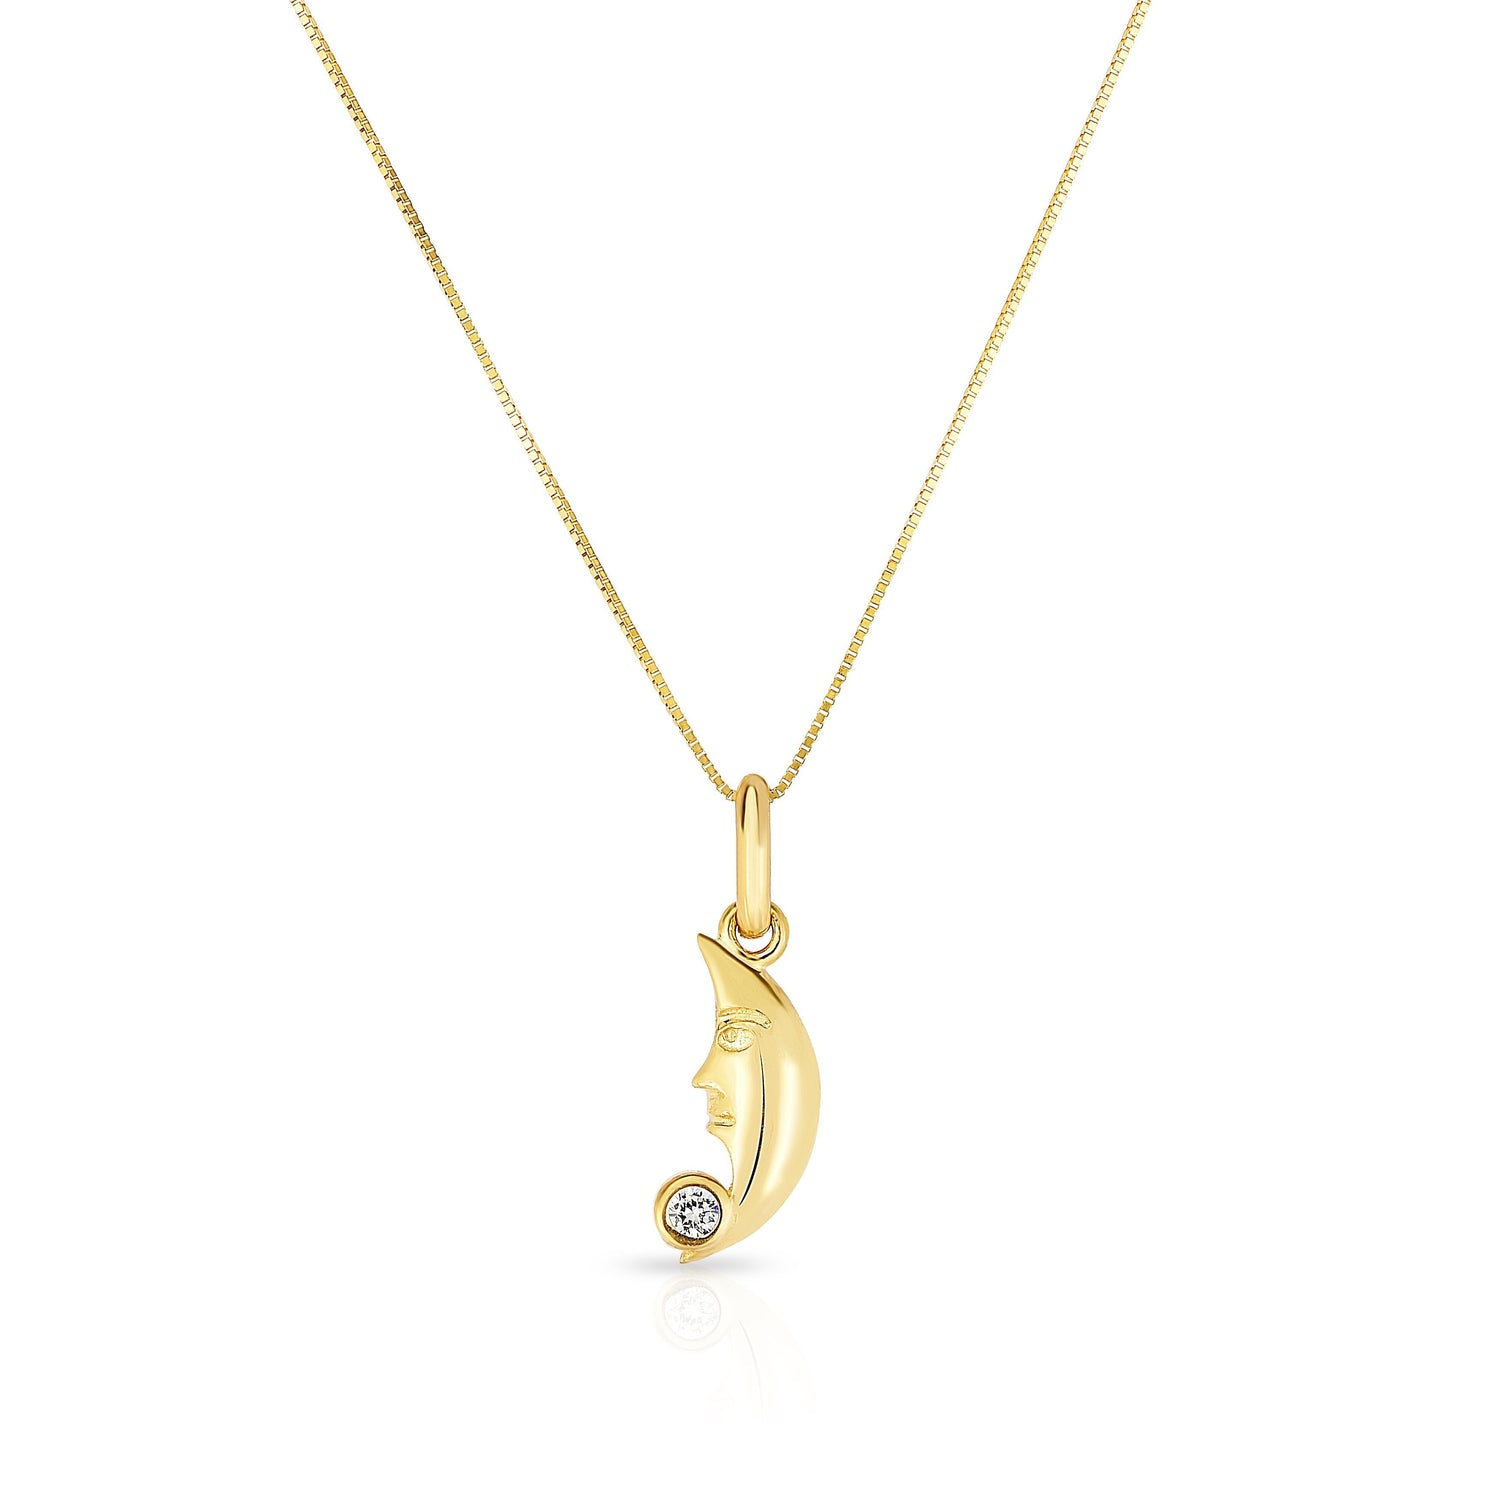 10k Yellow Gold Crescent Moon Face Charm Pendant Necklace with  Cubic Zirconia